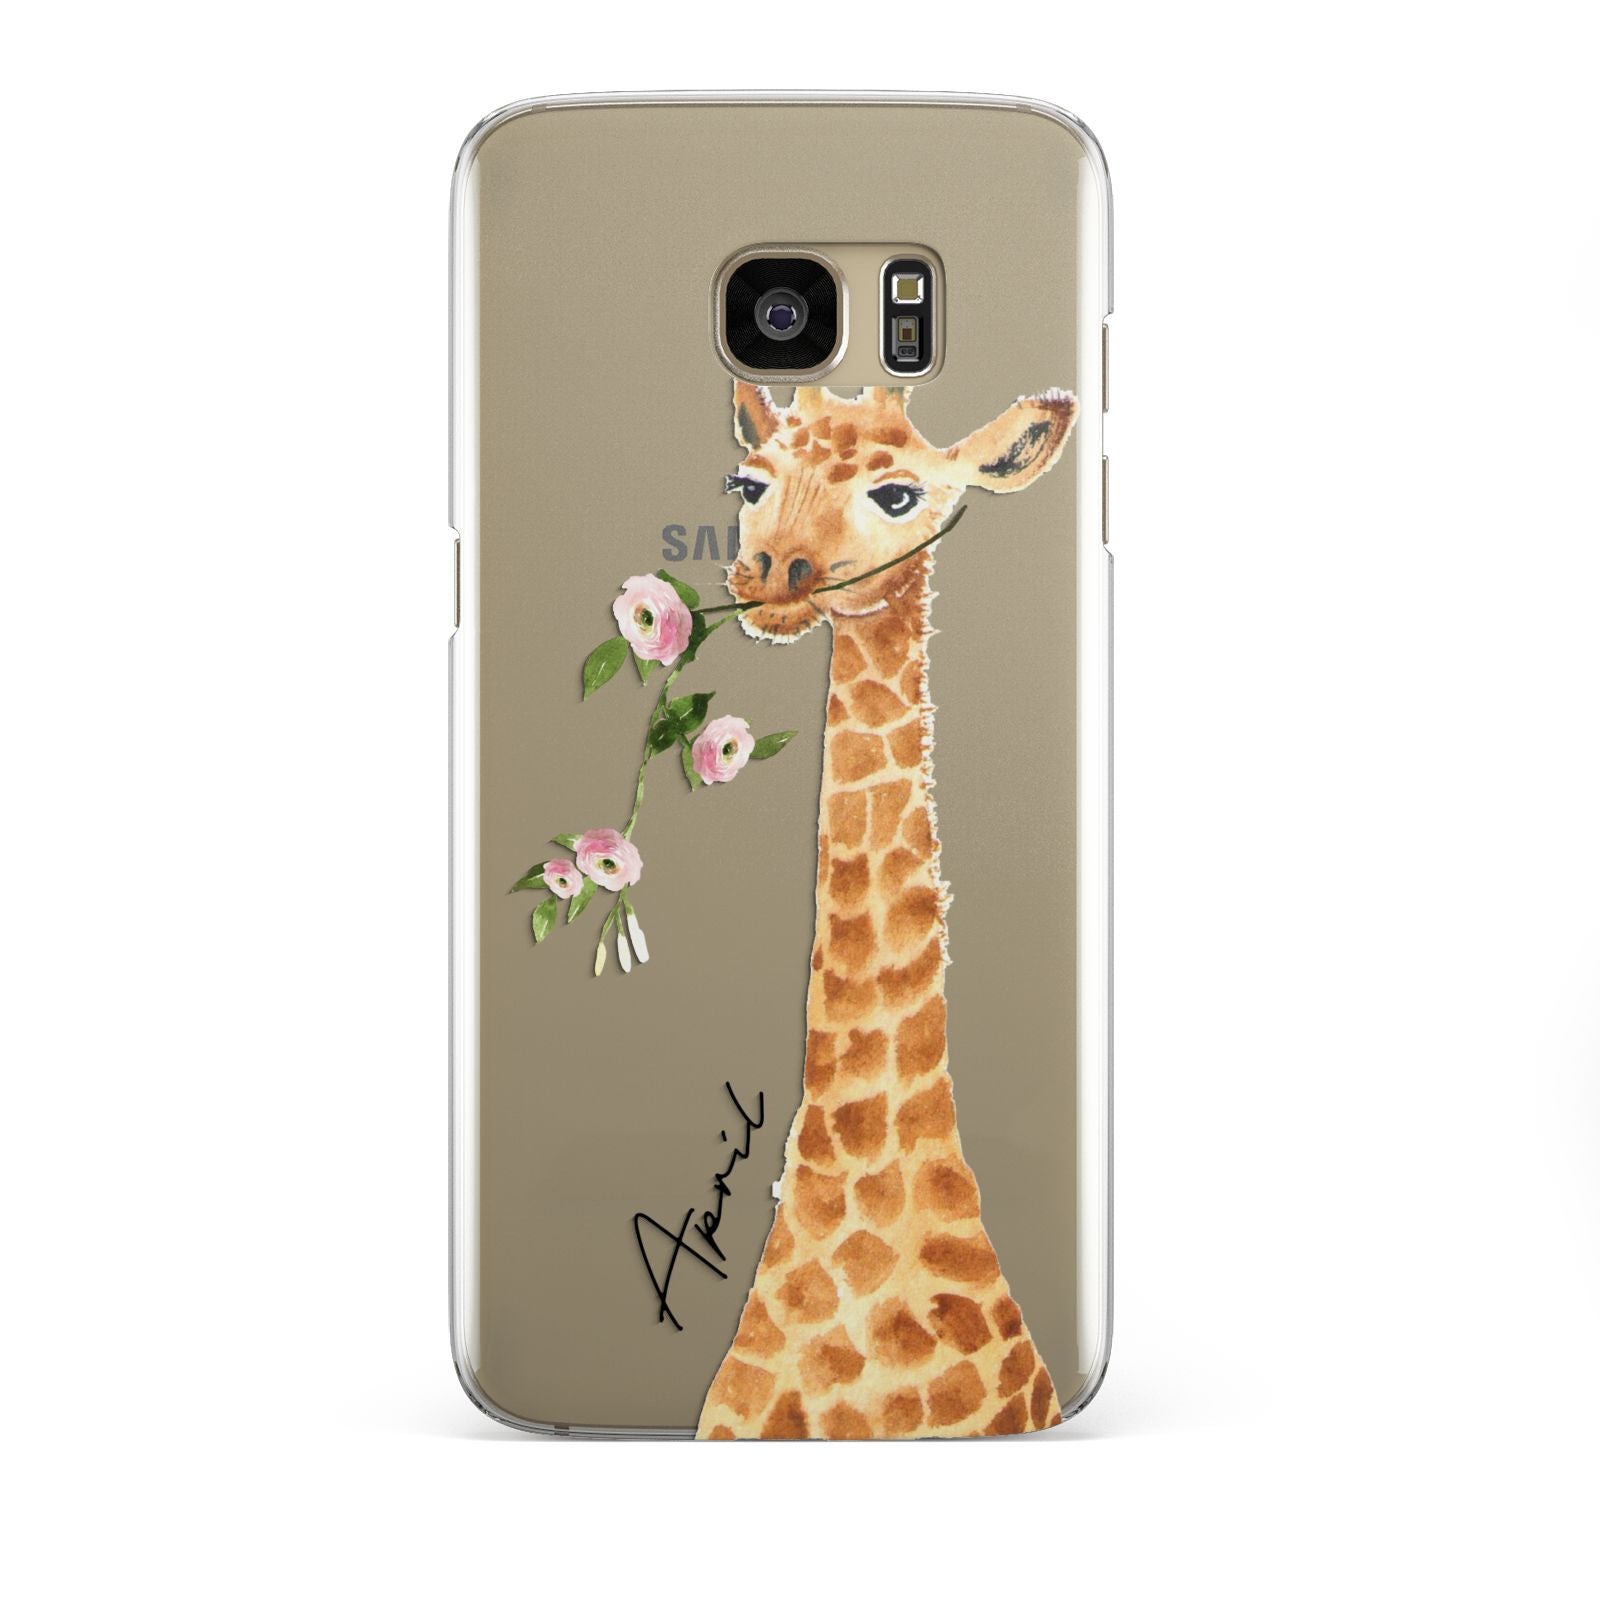 Personalised Giraffe with Name Samsung Galaxy S7 Edge Case